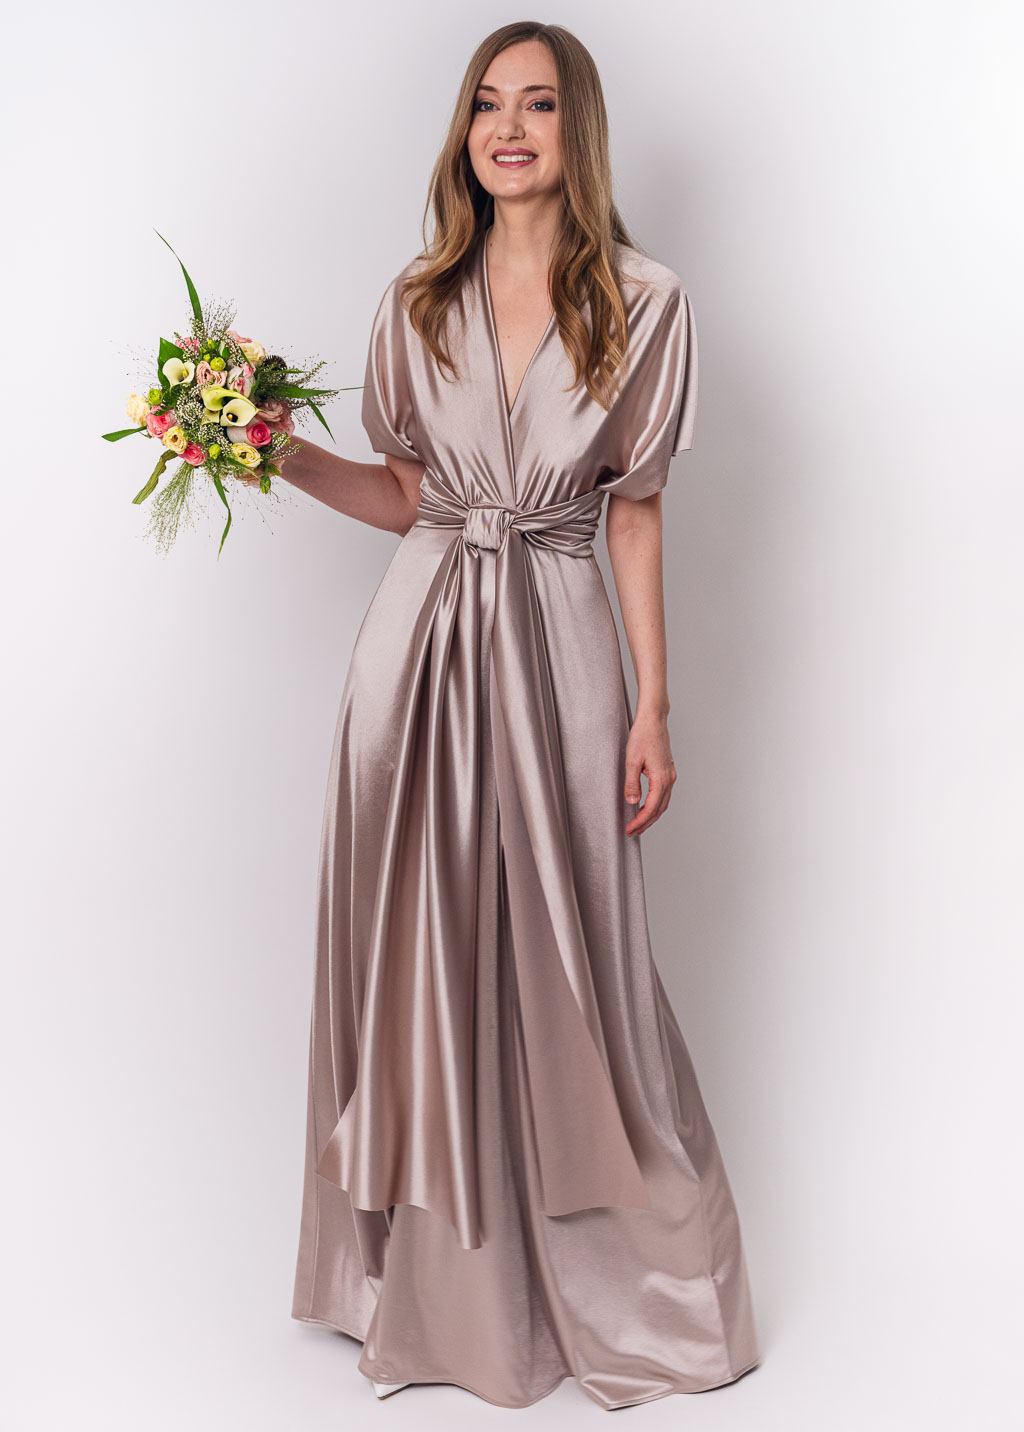 Champagne beige luxury satin infinity dress or jumpsuit